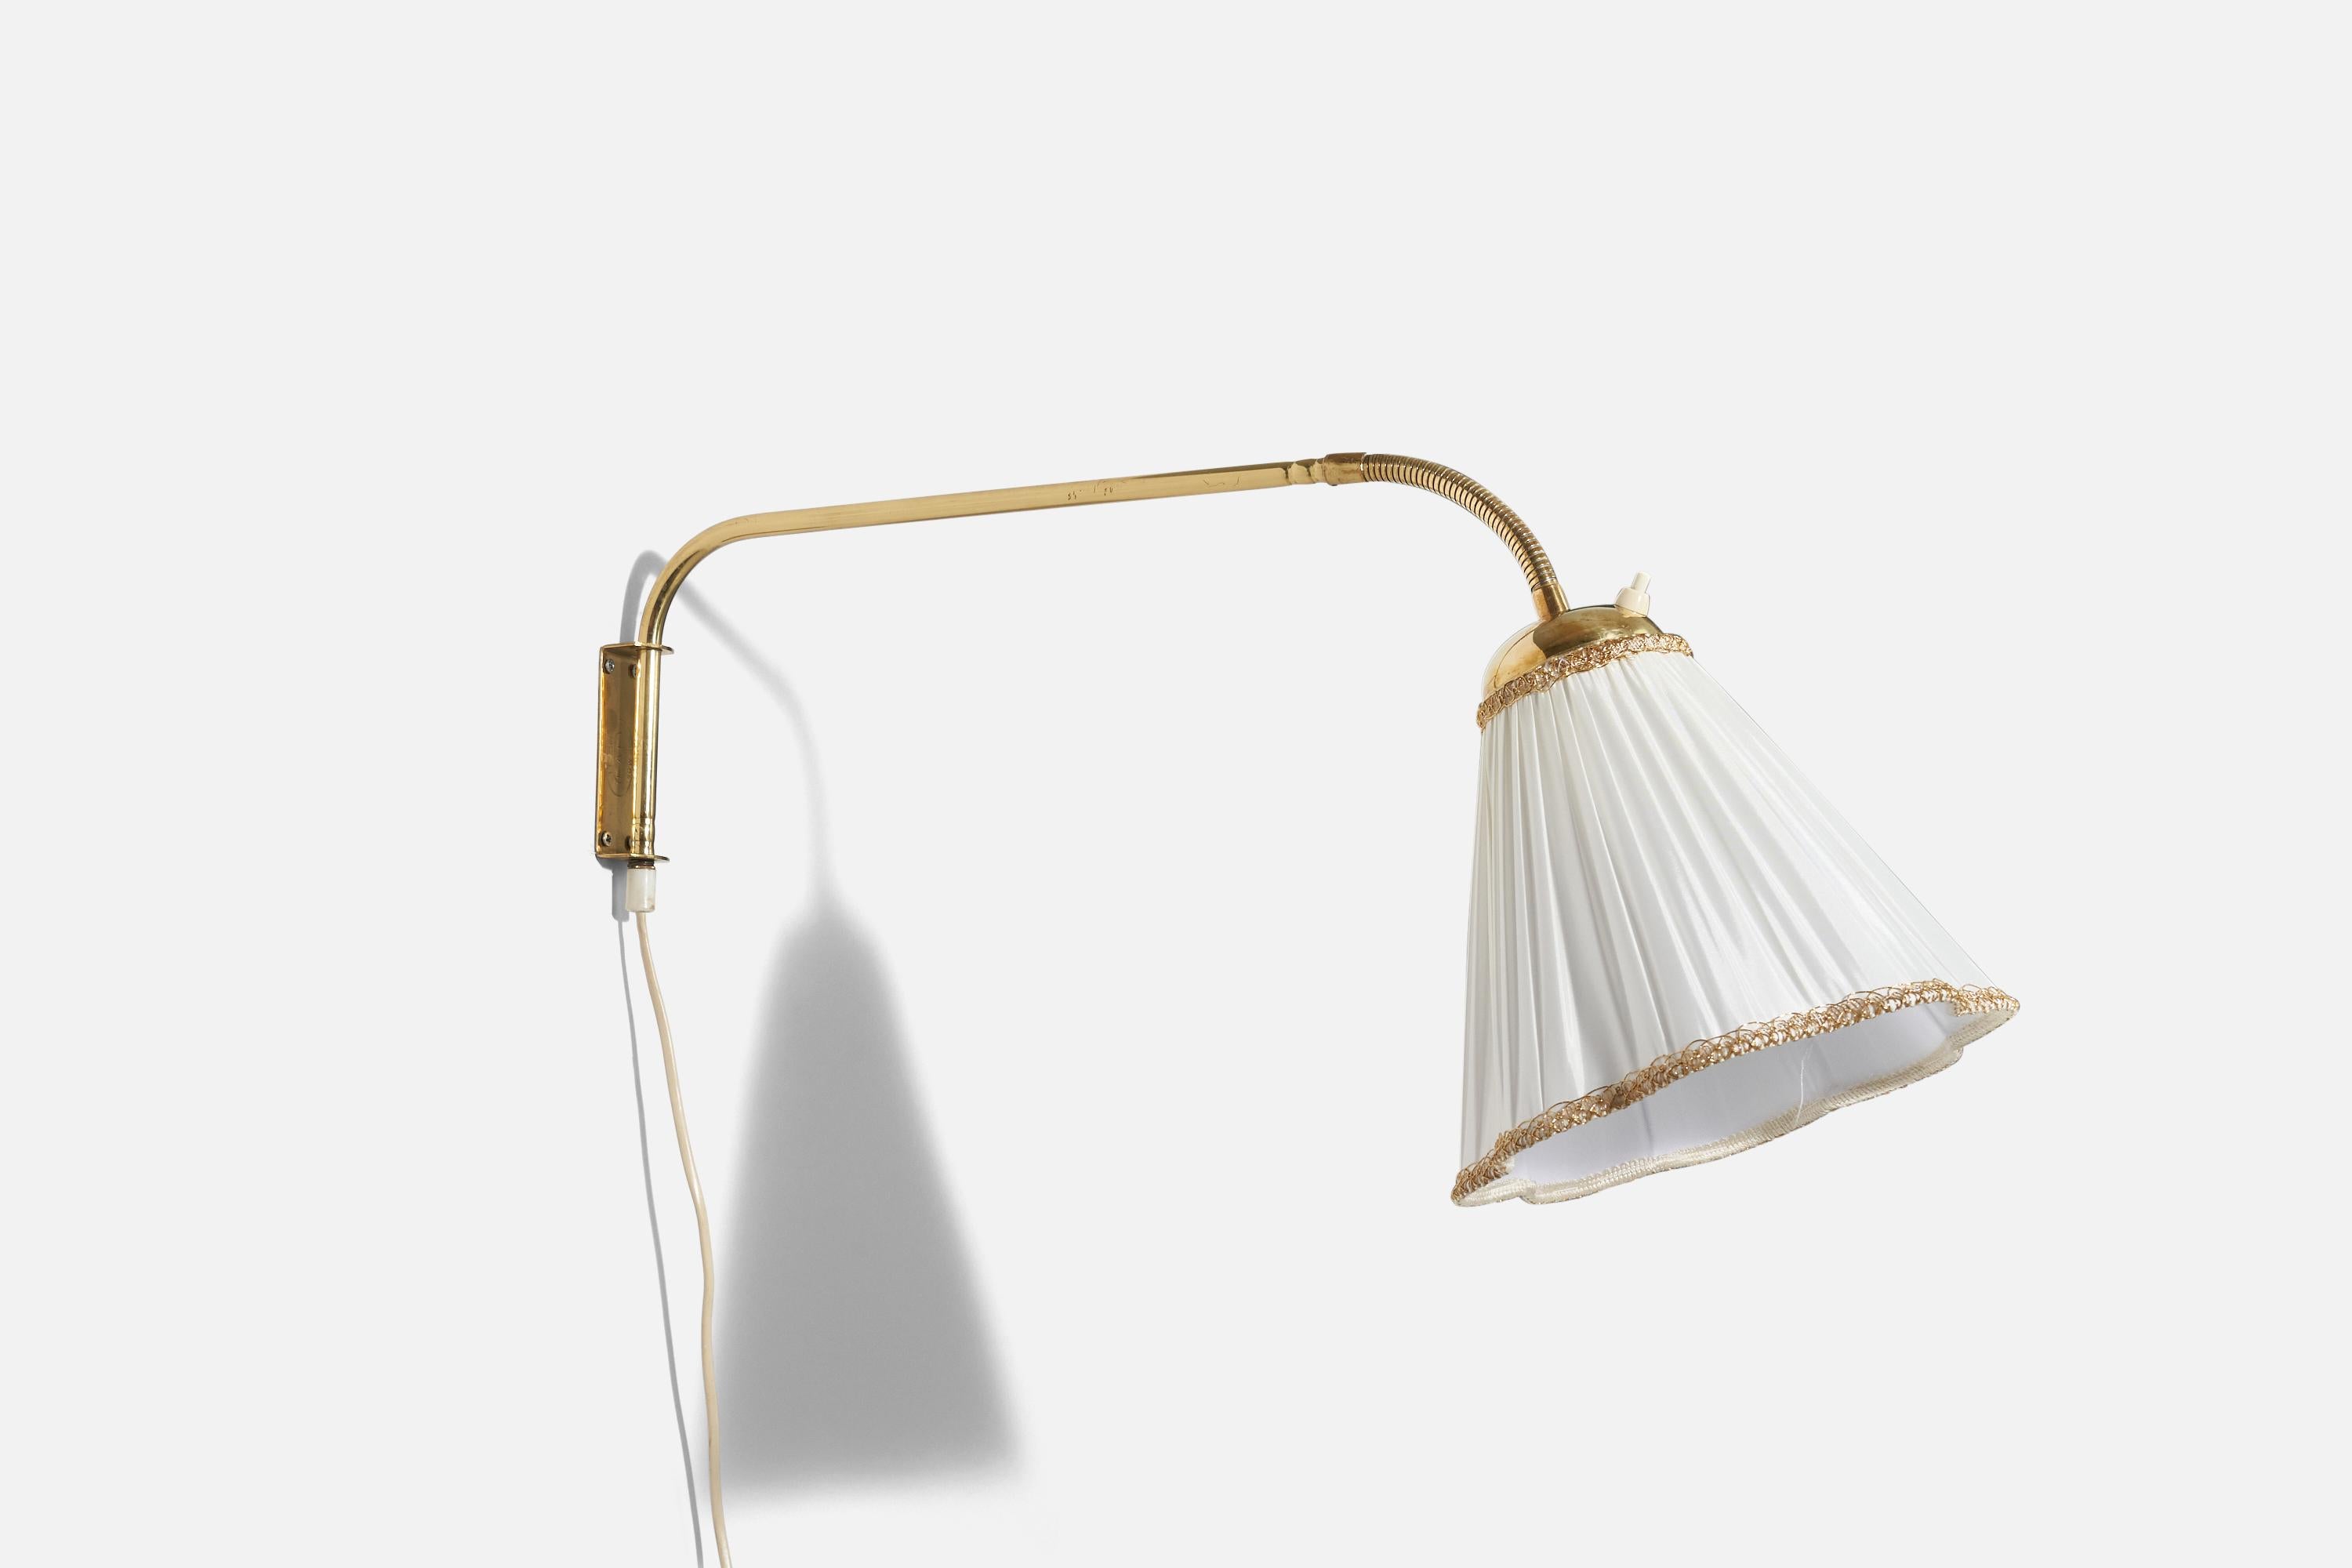 A brass and fabric wall light designed and produced in Sweden, c. 1940s.

Variable dimensions, measured as illustrated in the first image. 
Dimensions of back plate (inches) : (4 x 1.37 x .12) (H x W x D).